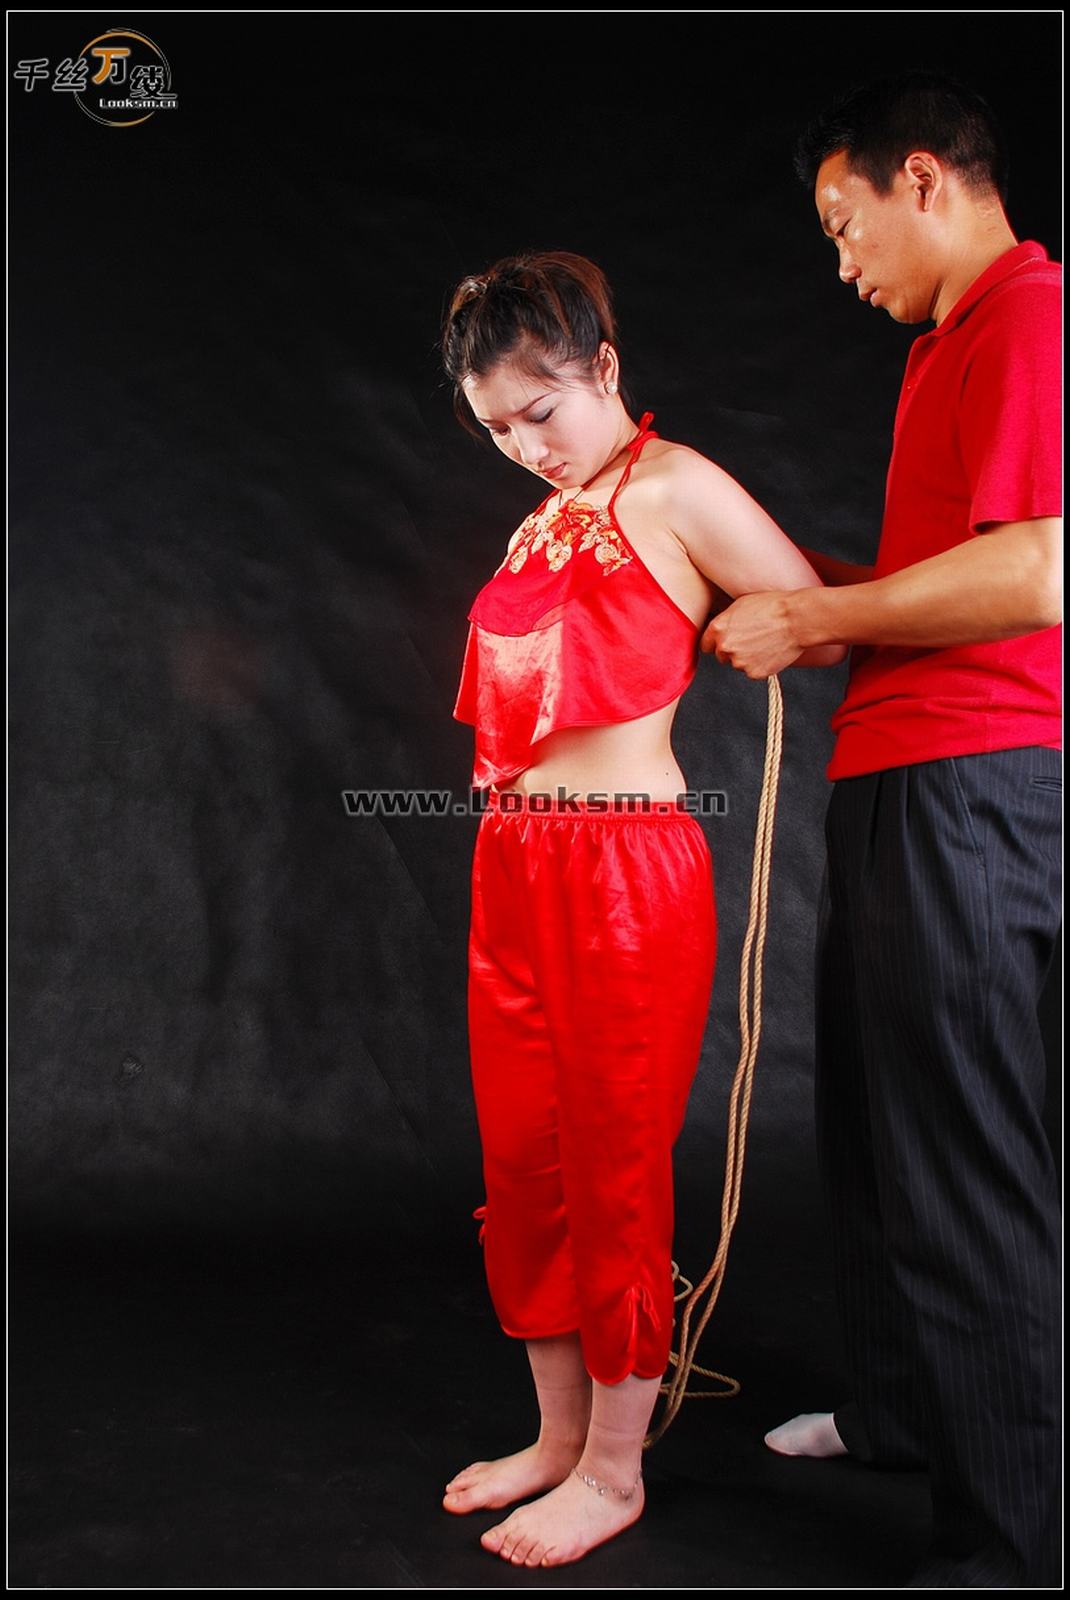 Chinese Rope Model 265